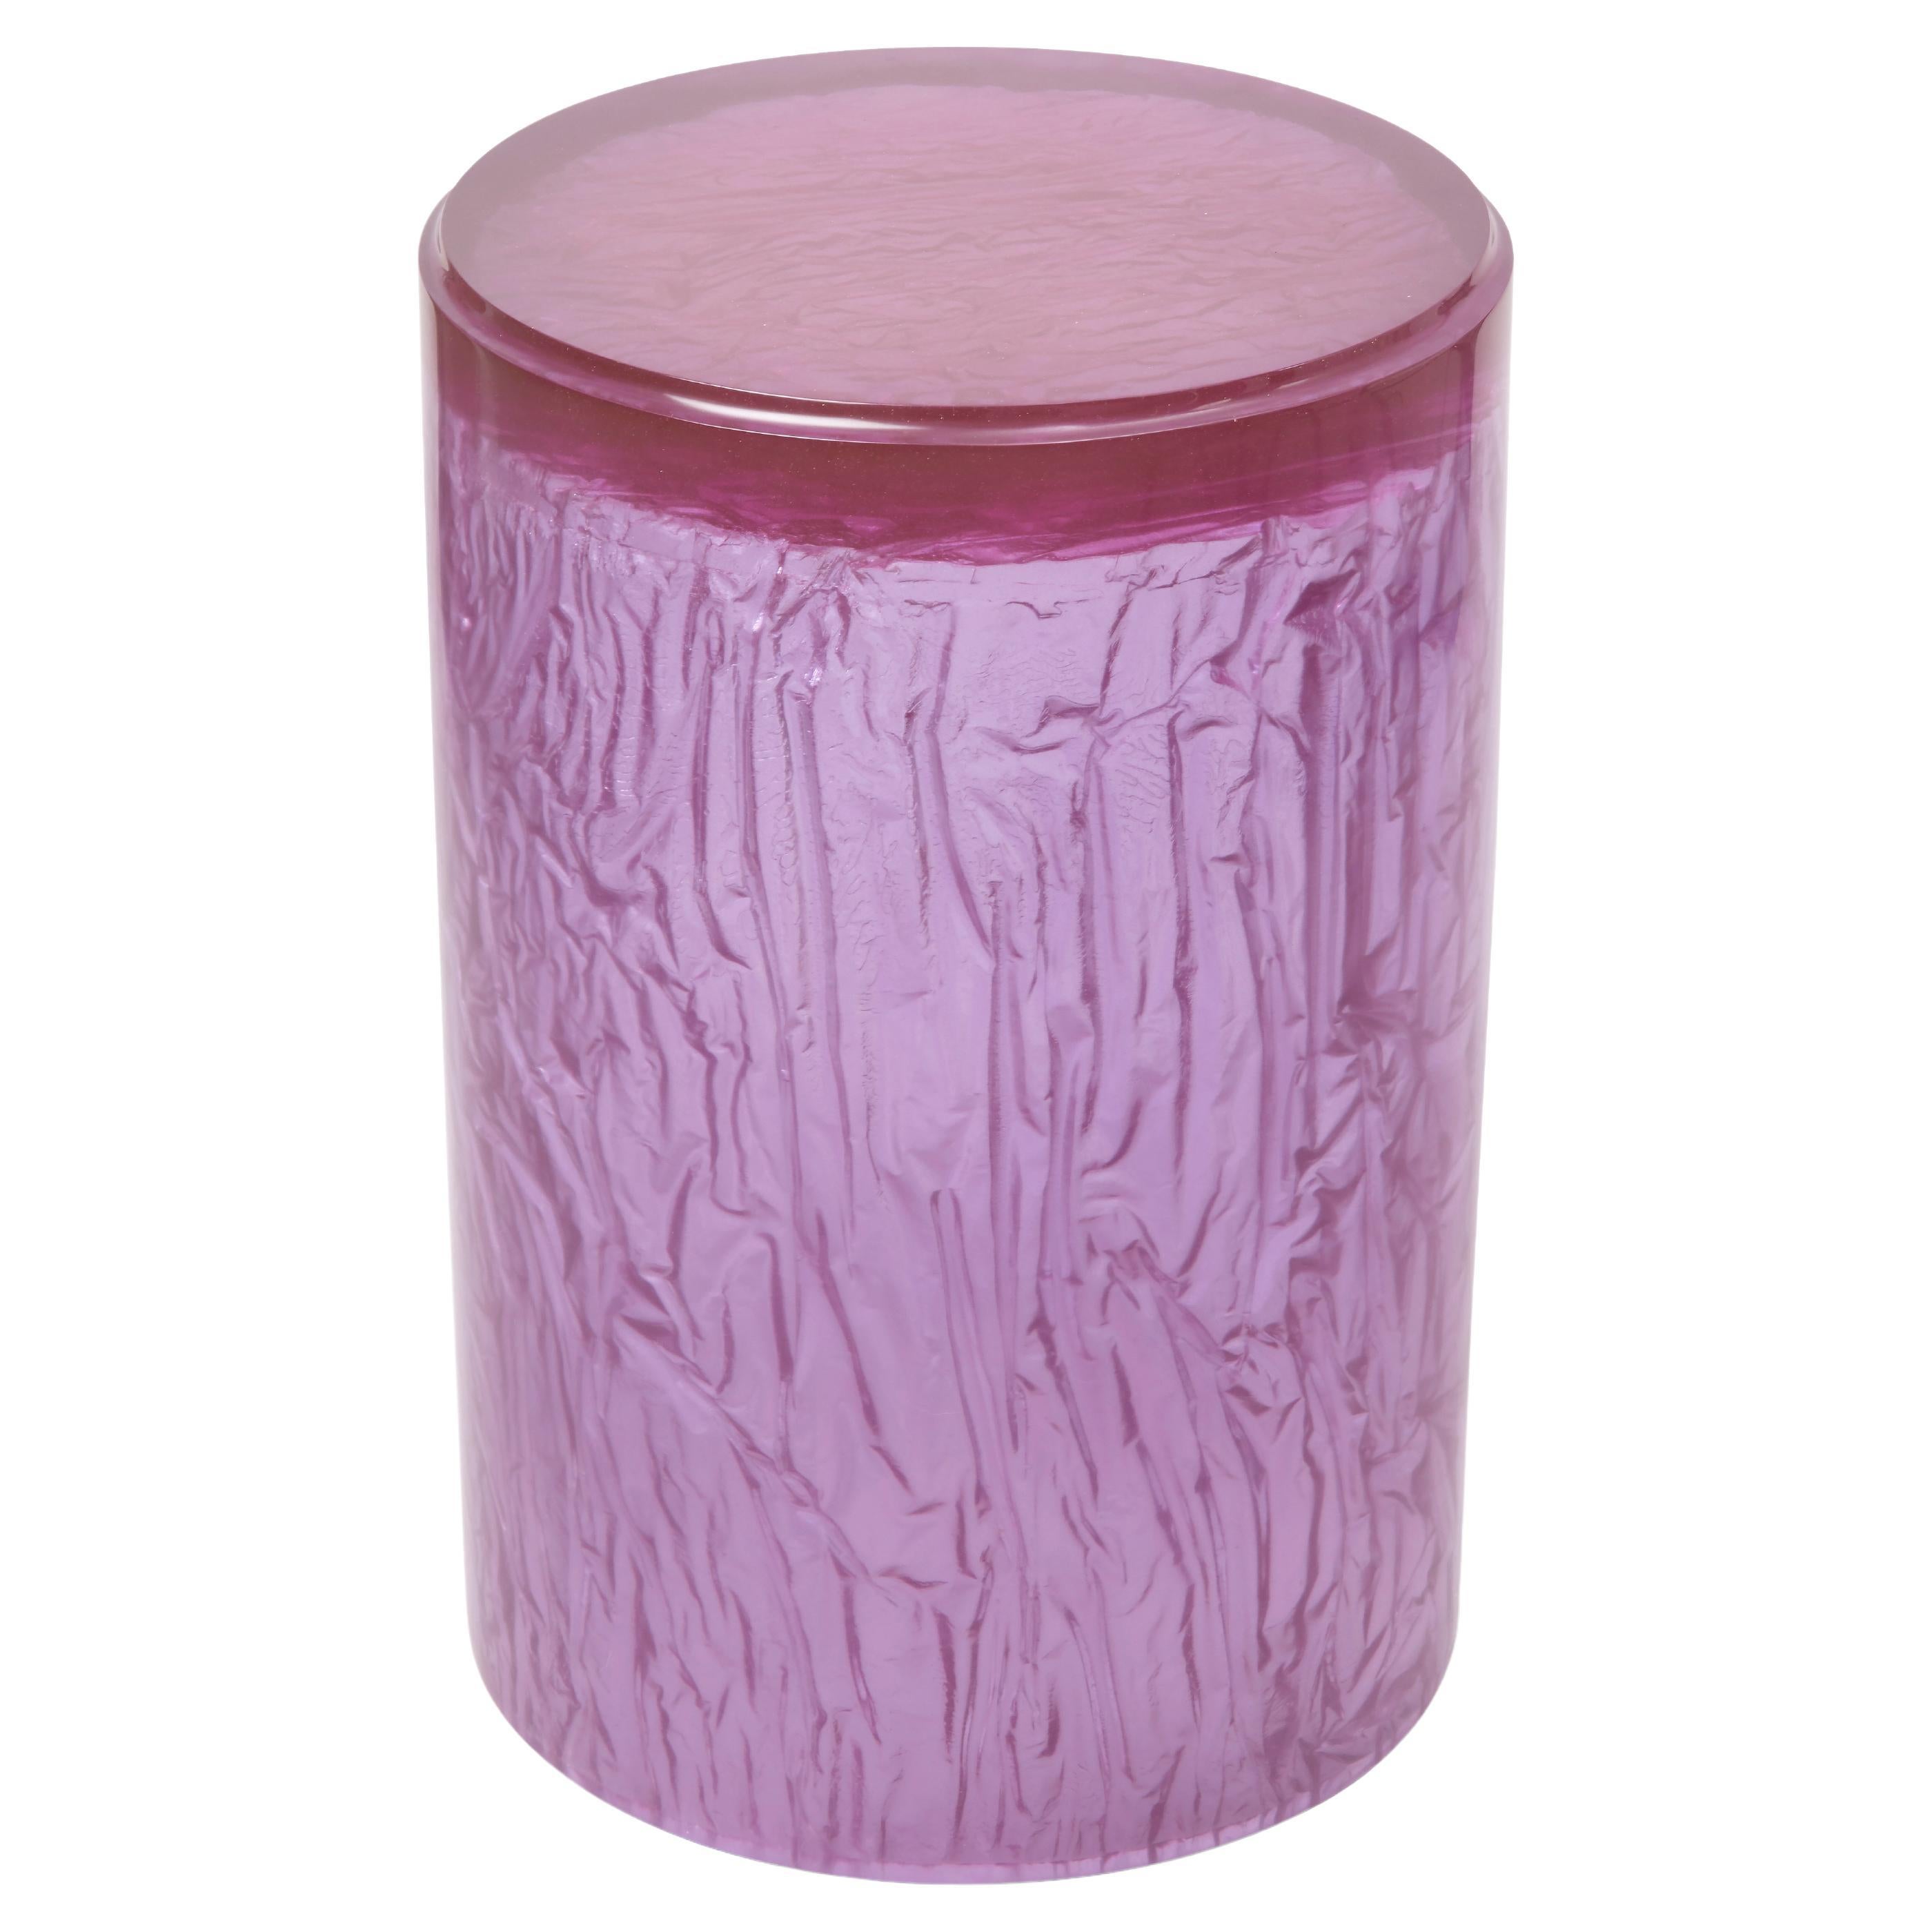 Contemporary Resin Acrylic Side Table or Stool by Natalie Tredgett, gloss Purple